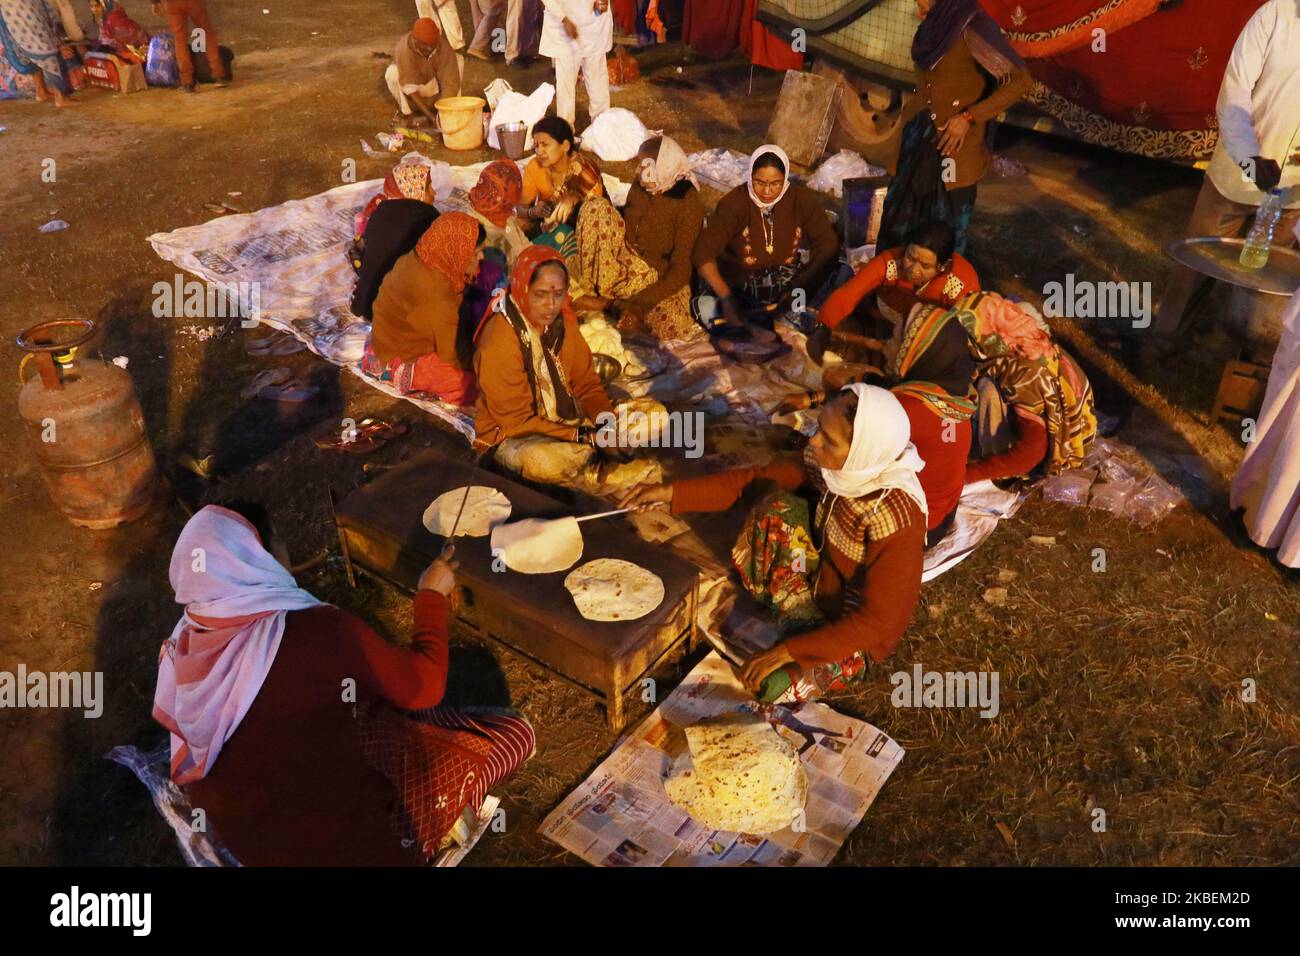 Indian devotee preparation Diner at the temporary Gangasagar Mela camp at Babughat on January 14,2020 in Kolkata,India. Thousands of Hindu pilgrims are expected to take the annual holy dip at Gangasagar, where the Ganges River reaches the Bay of Bengal, on the auspicious Makar Sankranti festival day that falls on Jan. 15. (Photo by Debajyoti Chakraborty/NurPhoto) Stock Photo